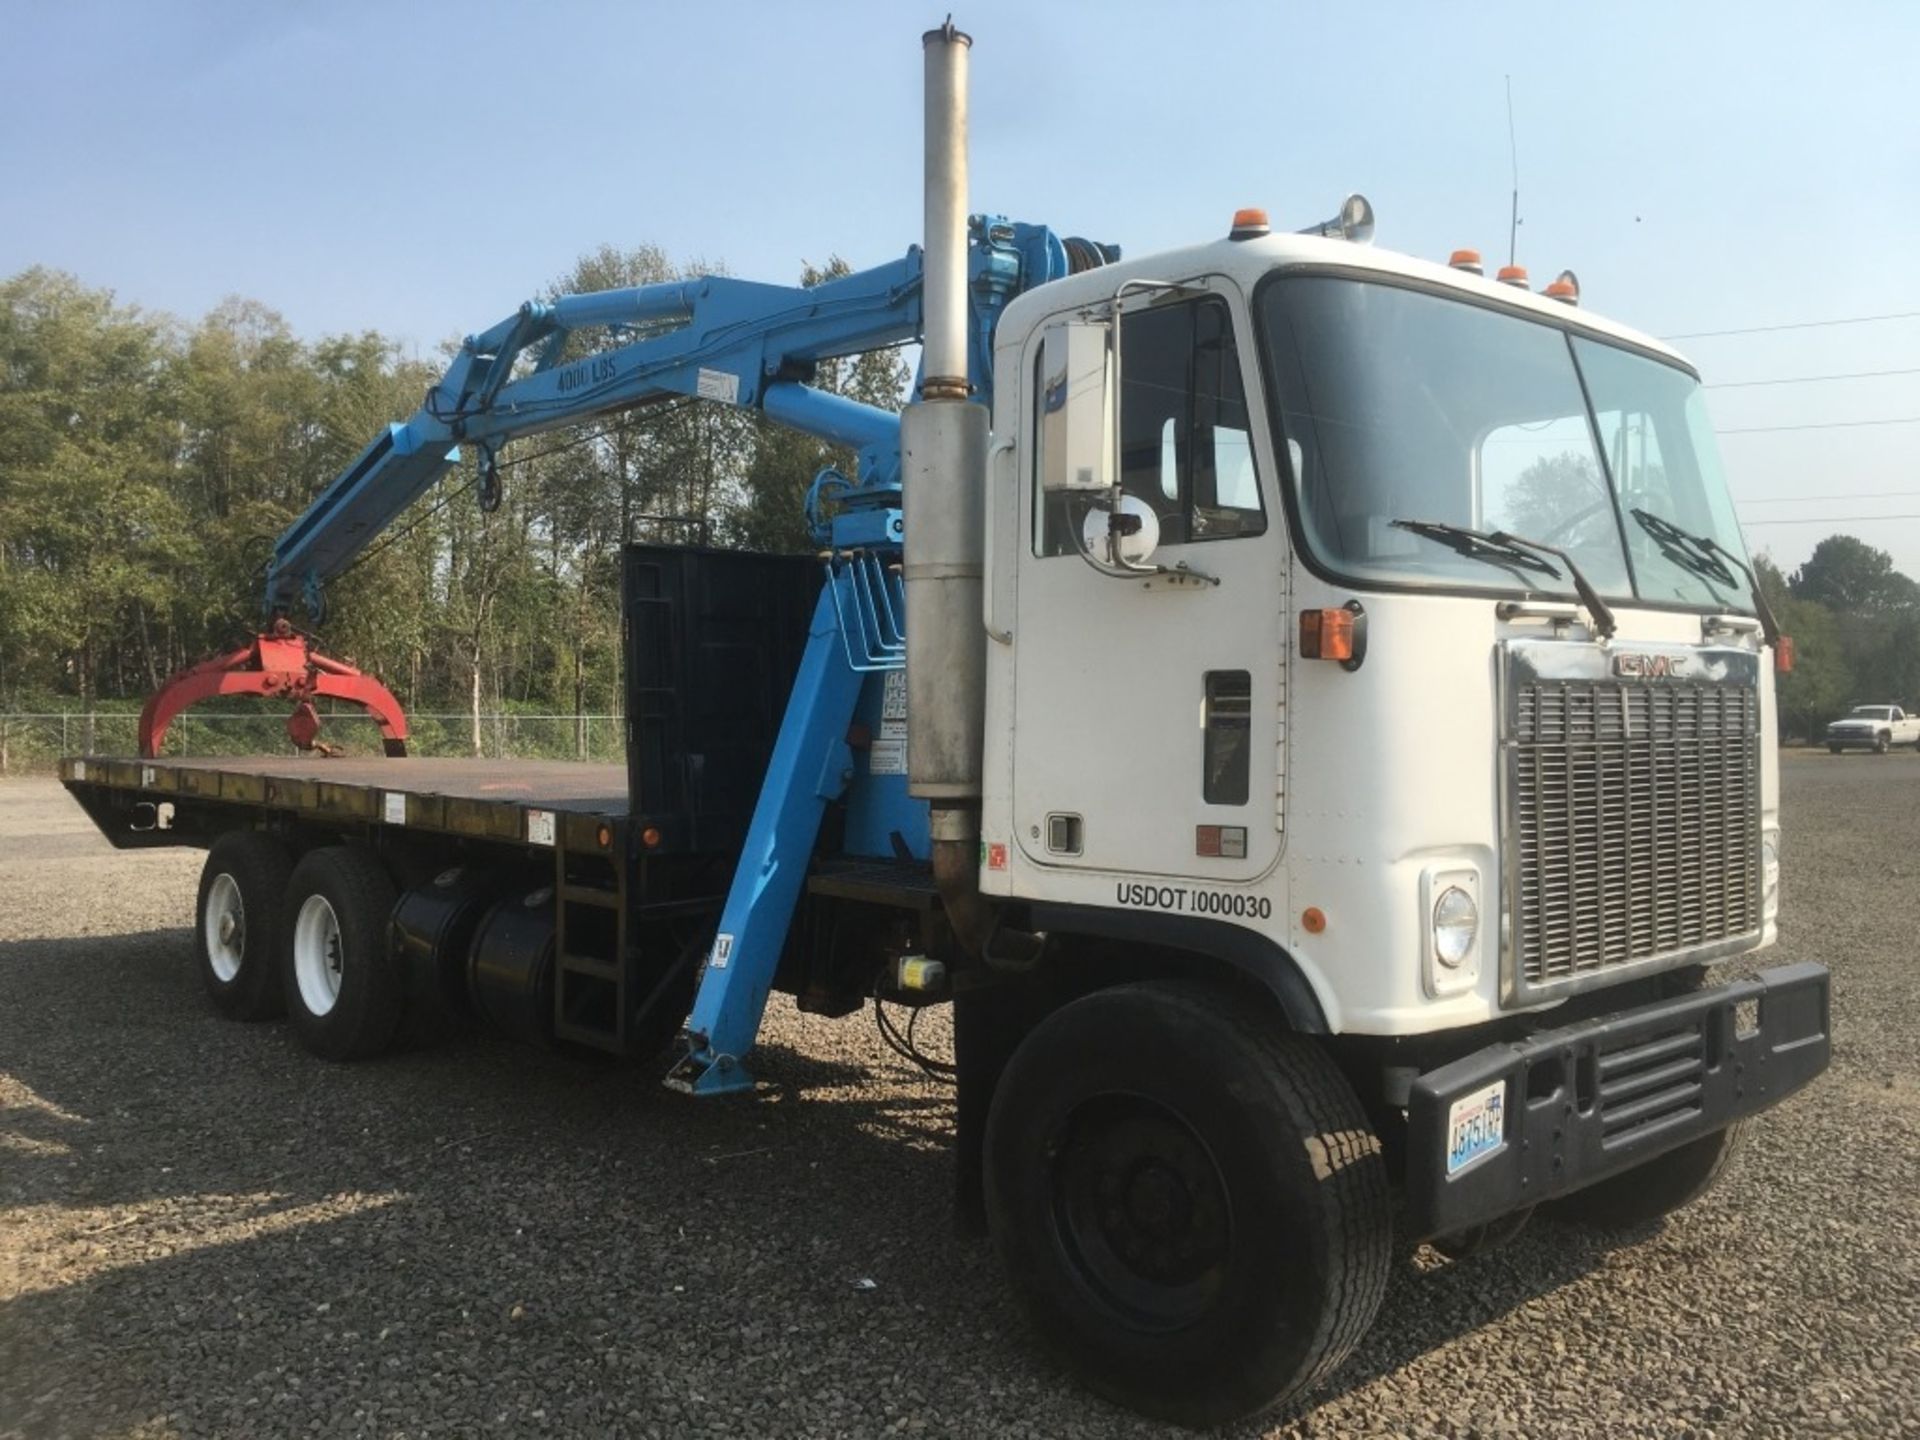 1980 GMC Astro T/A Material Handler Truck - Image 2 of 13